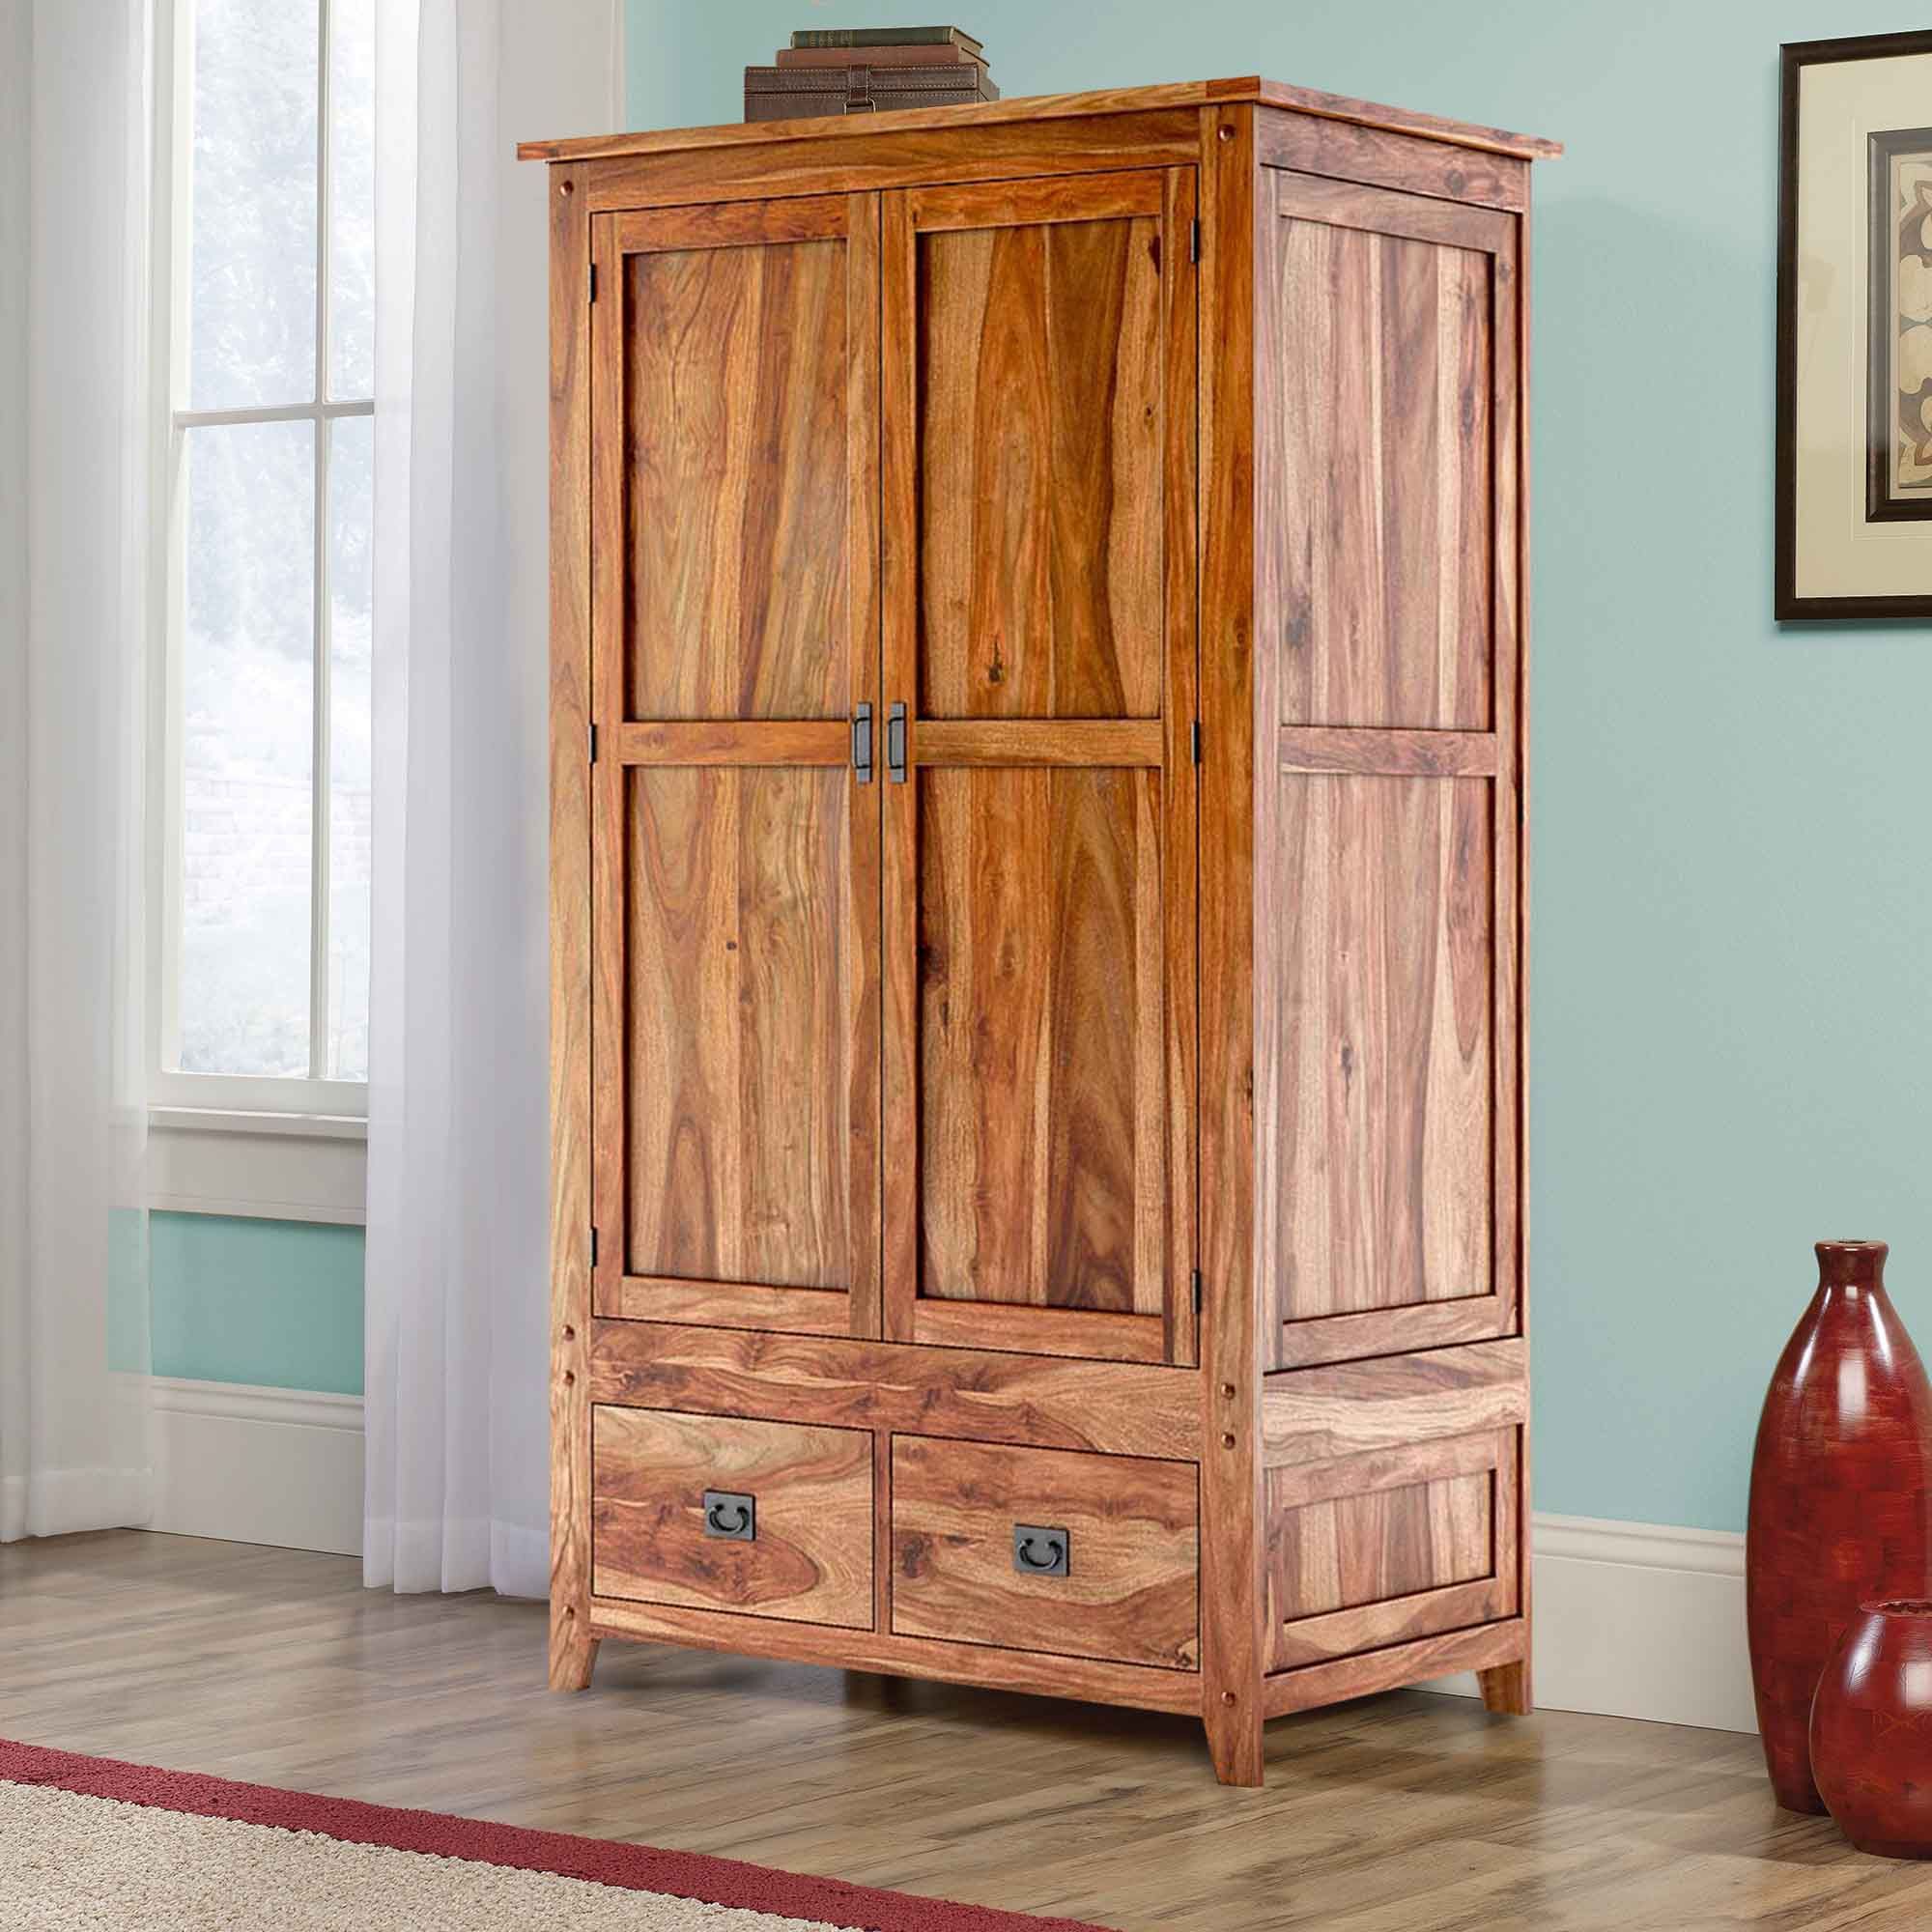 Delaware Farmhouse Solid Wood Wardrobe Armoire With Drawers With Regard To Cheap Wood Wardrobes (View 6 of 15)